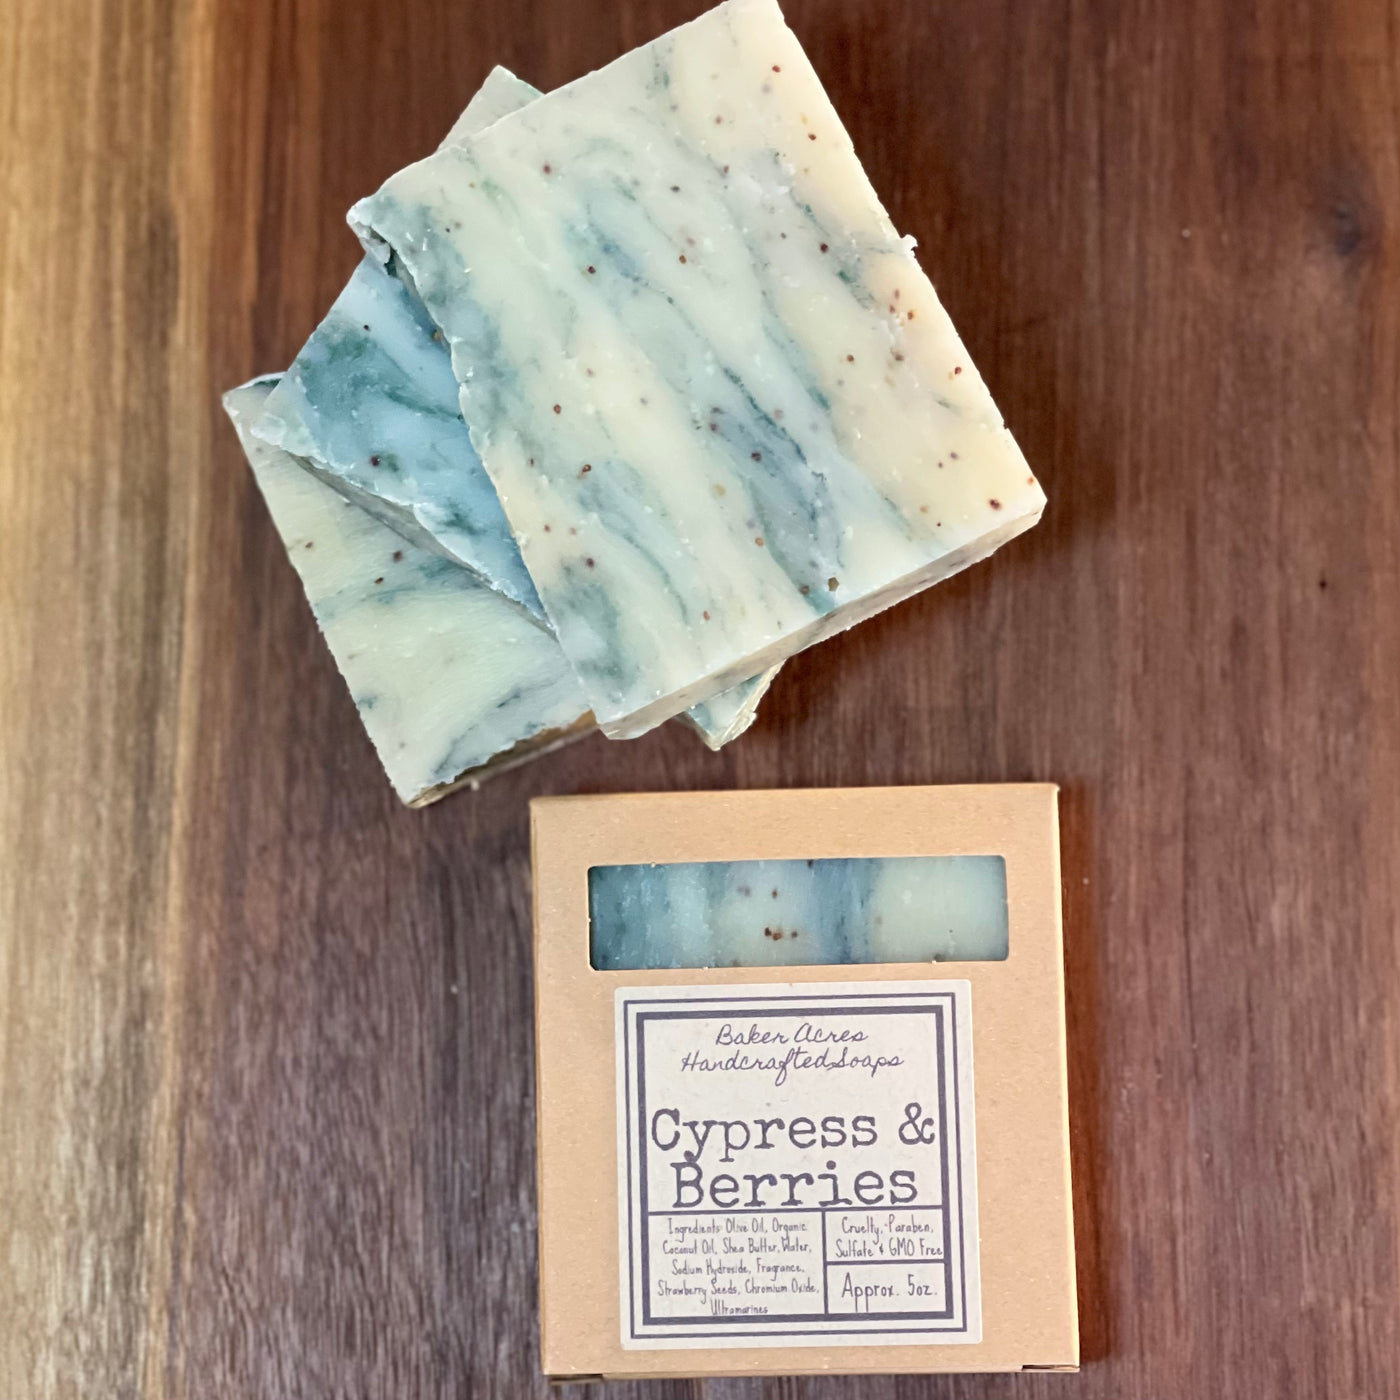 Cypress & Berries Handcrafted Soap